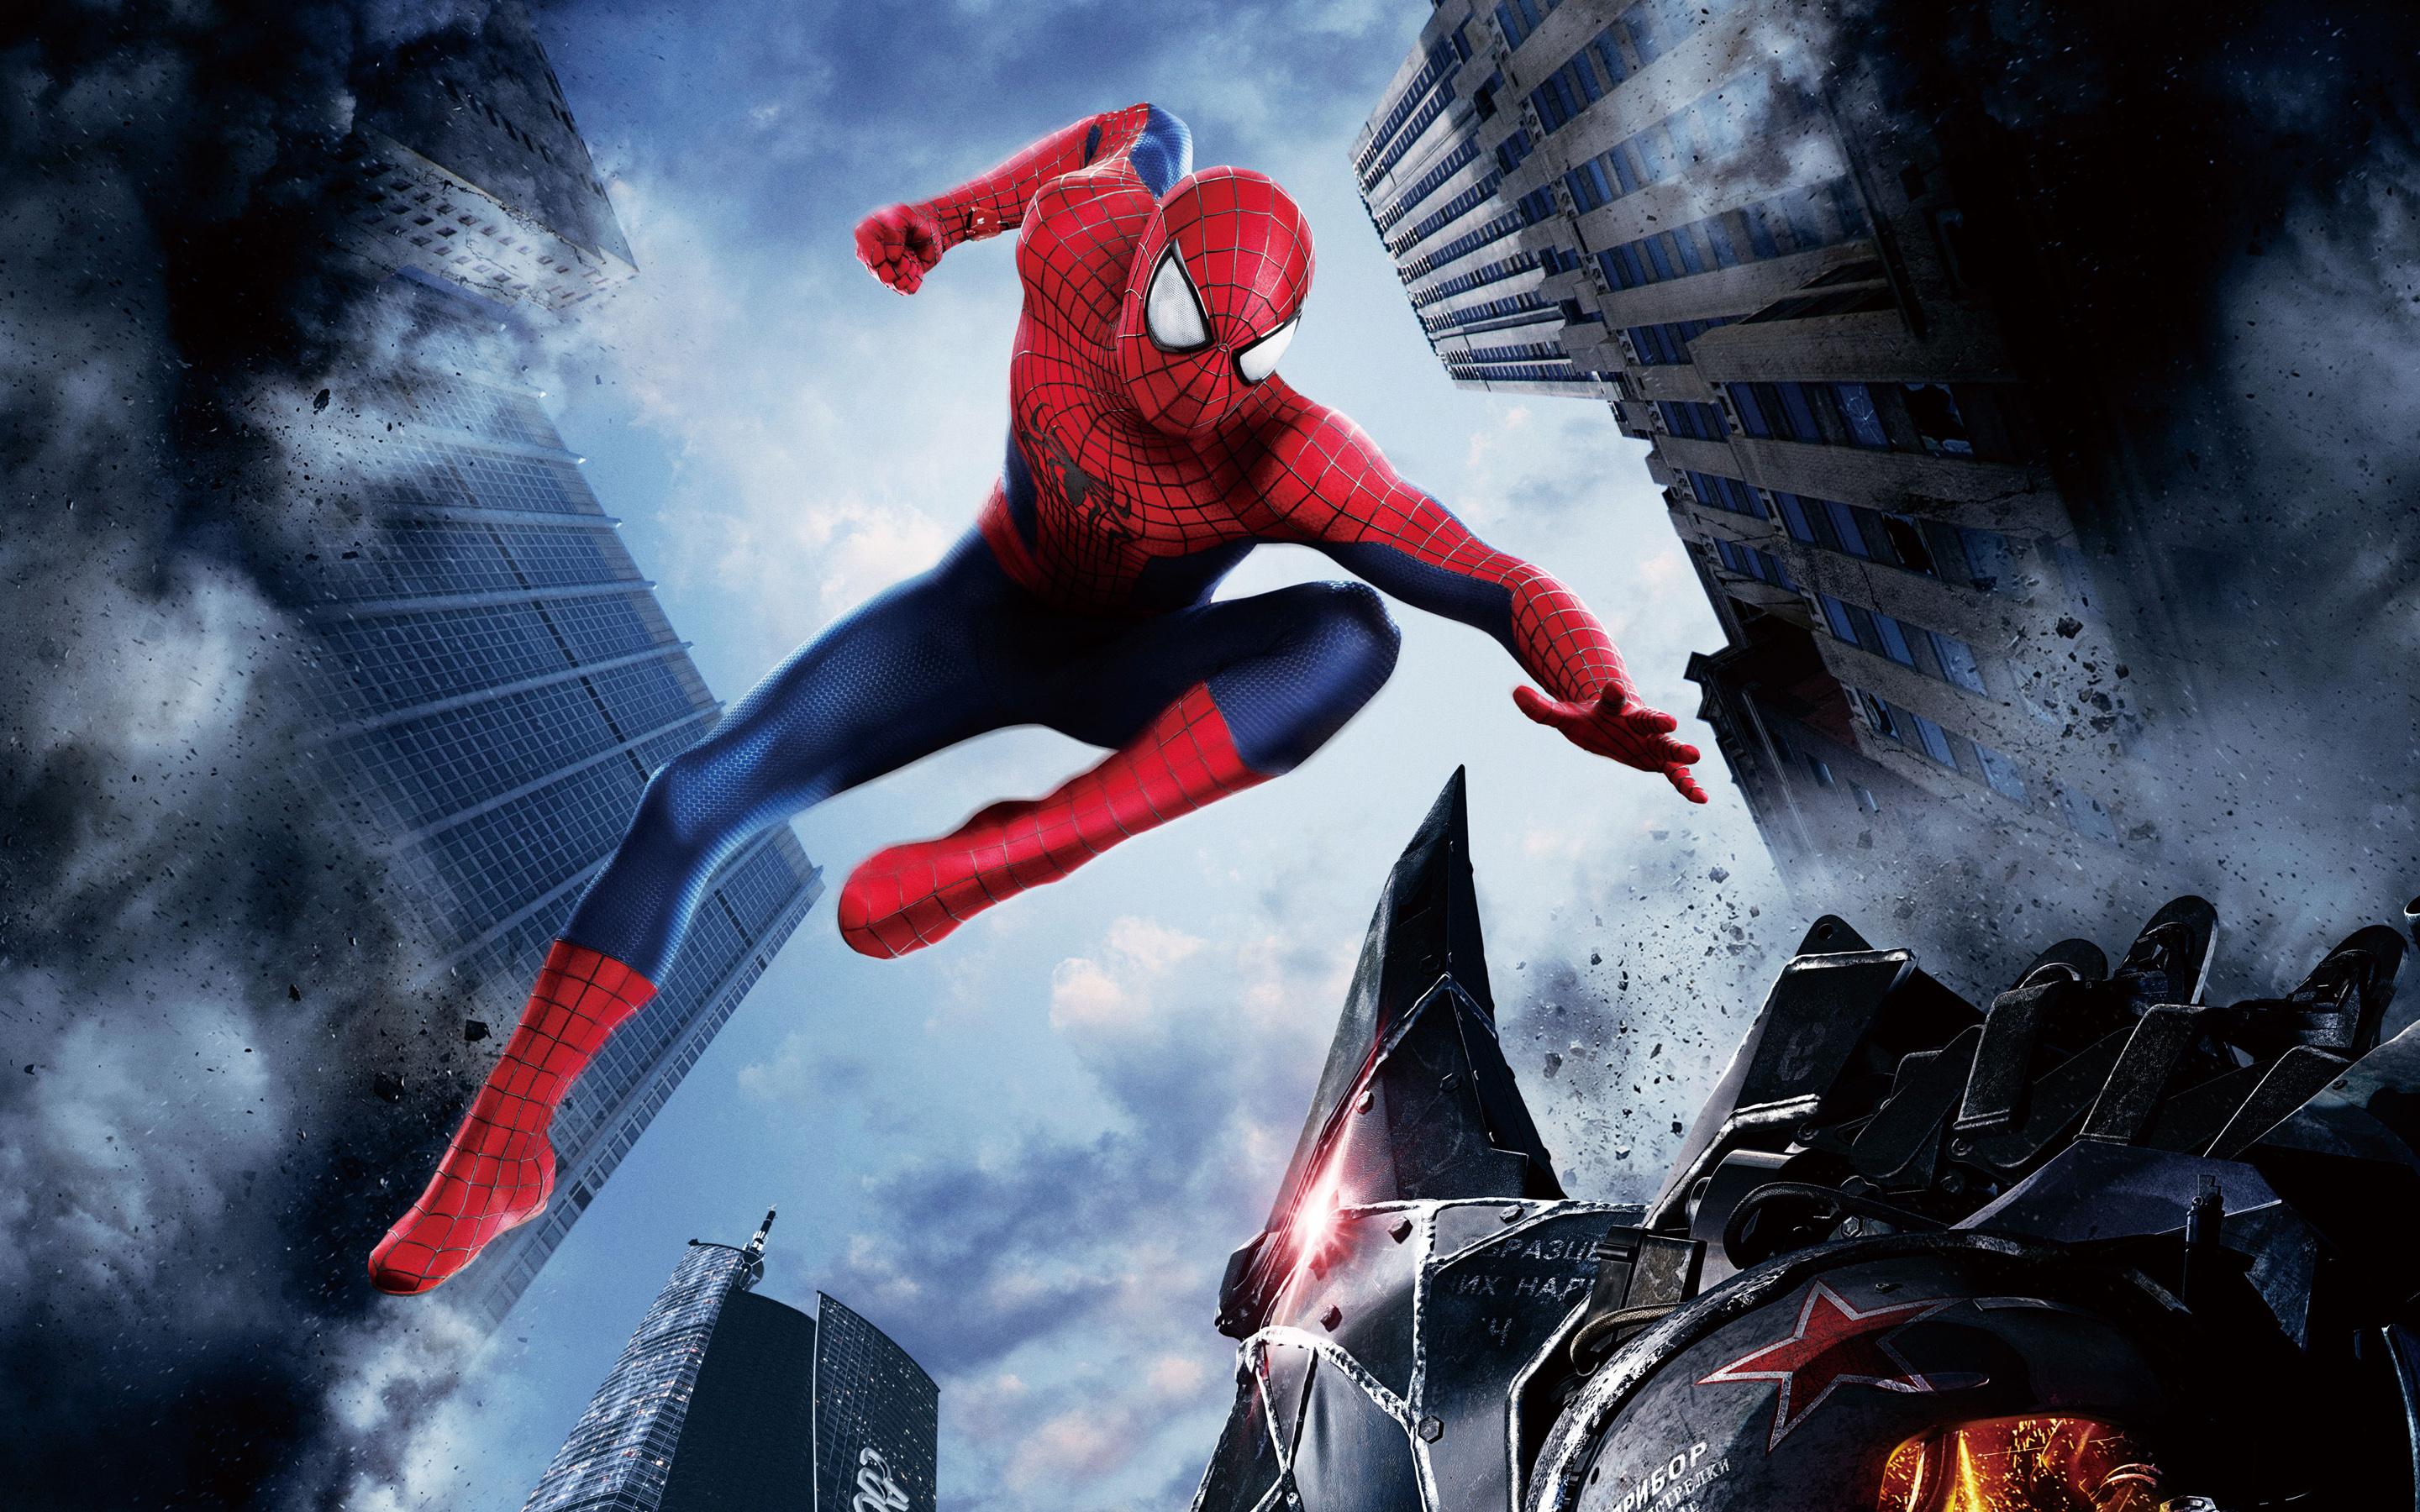 Free Download Hd 3d Wallpapers Download Hd The Amazing Spider Man 2 2014 2880x1800 For Your Desktop Mobile Tablet Explore 65 Spider Man Hd Wallpaper Spider Man Wallpaper Spider